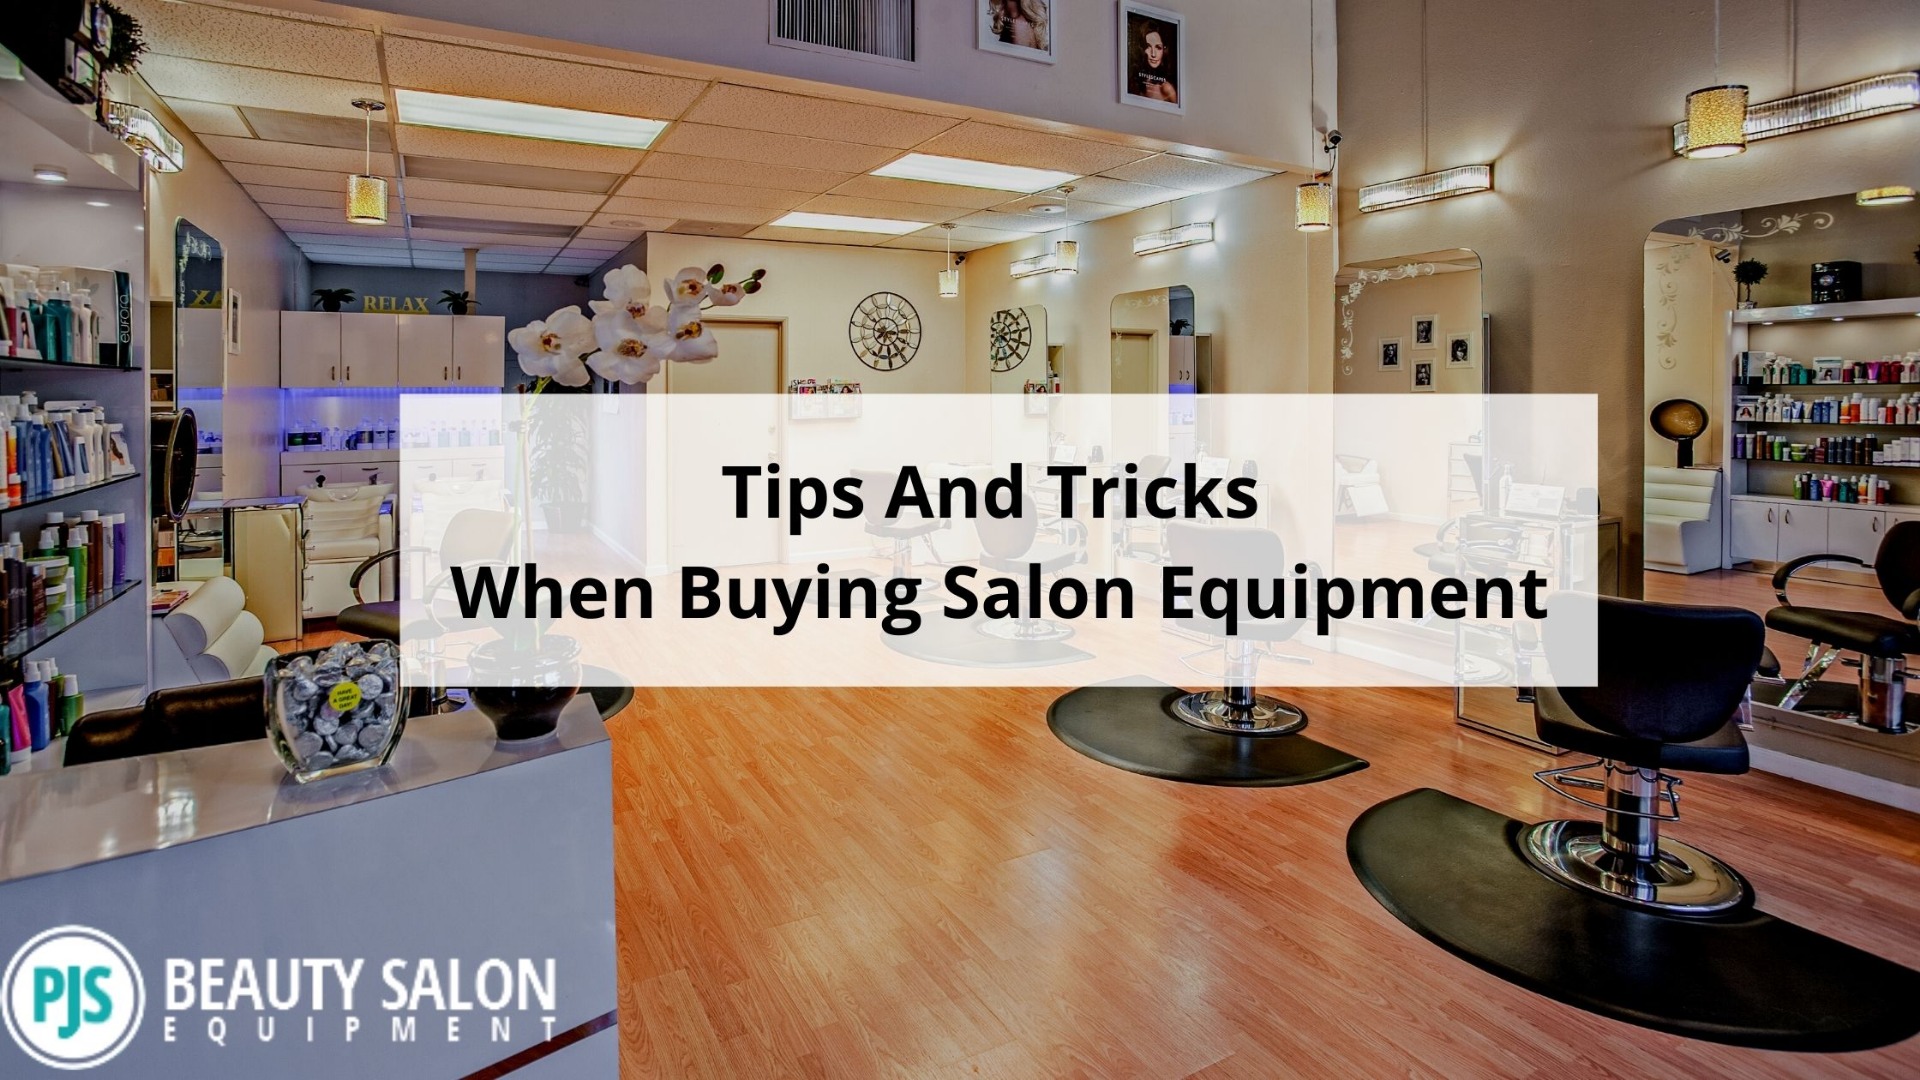 Tips And Tricks When Buying Salon Equipment